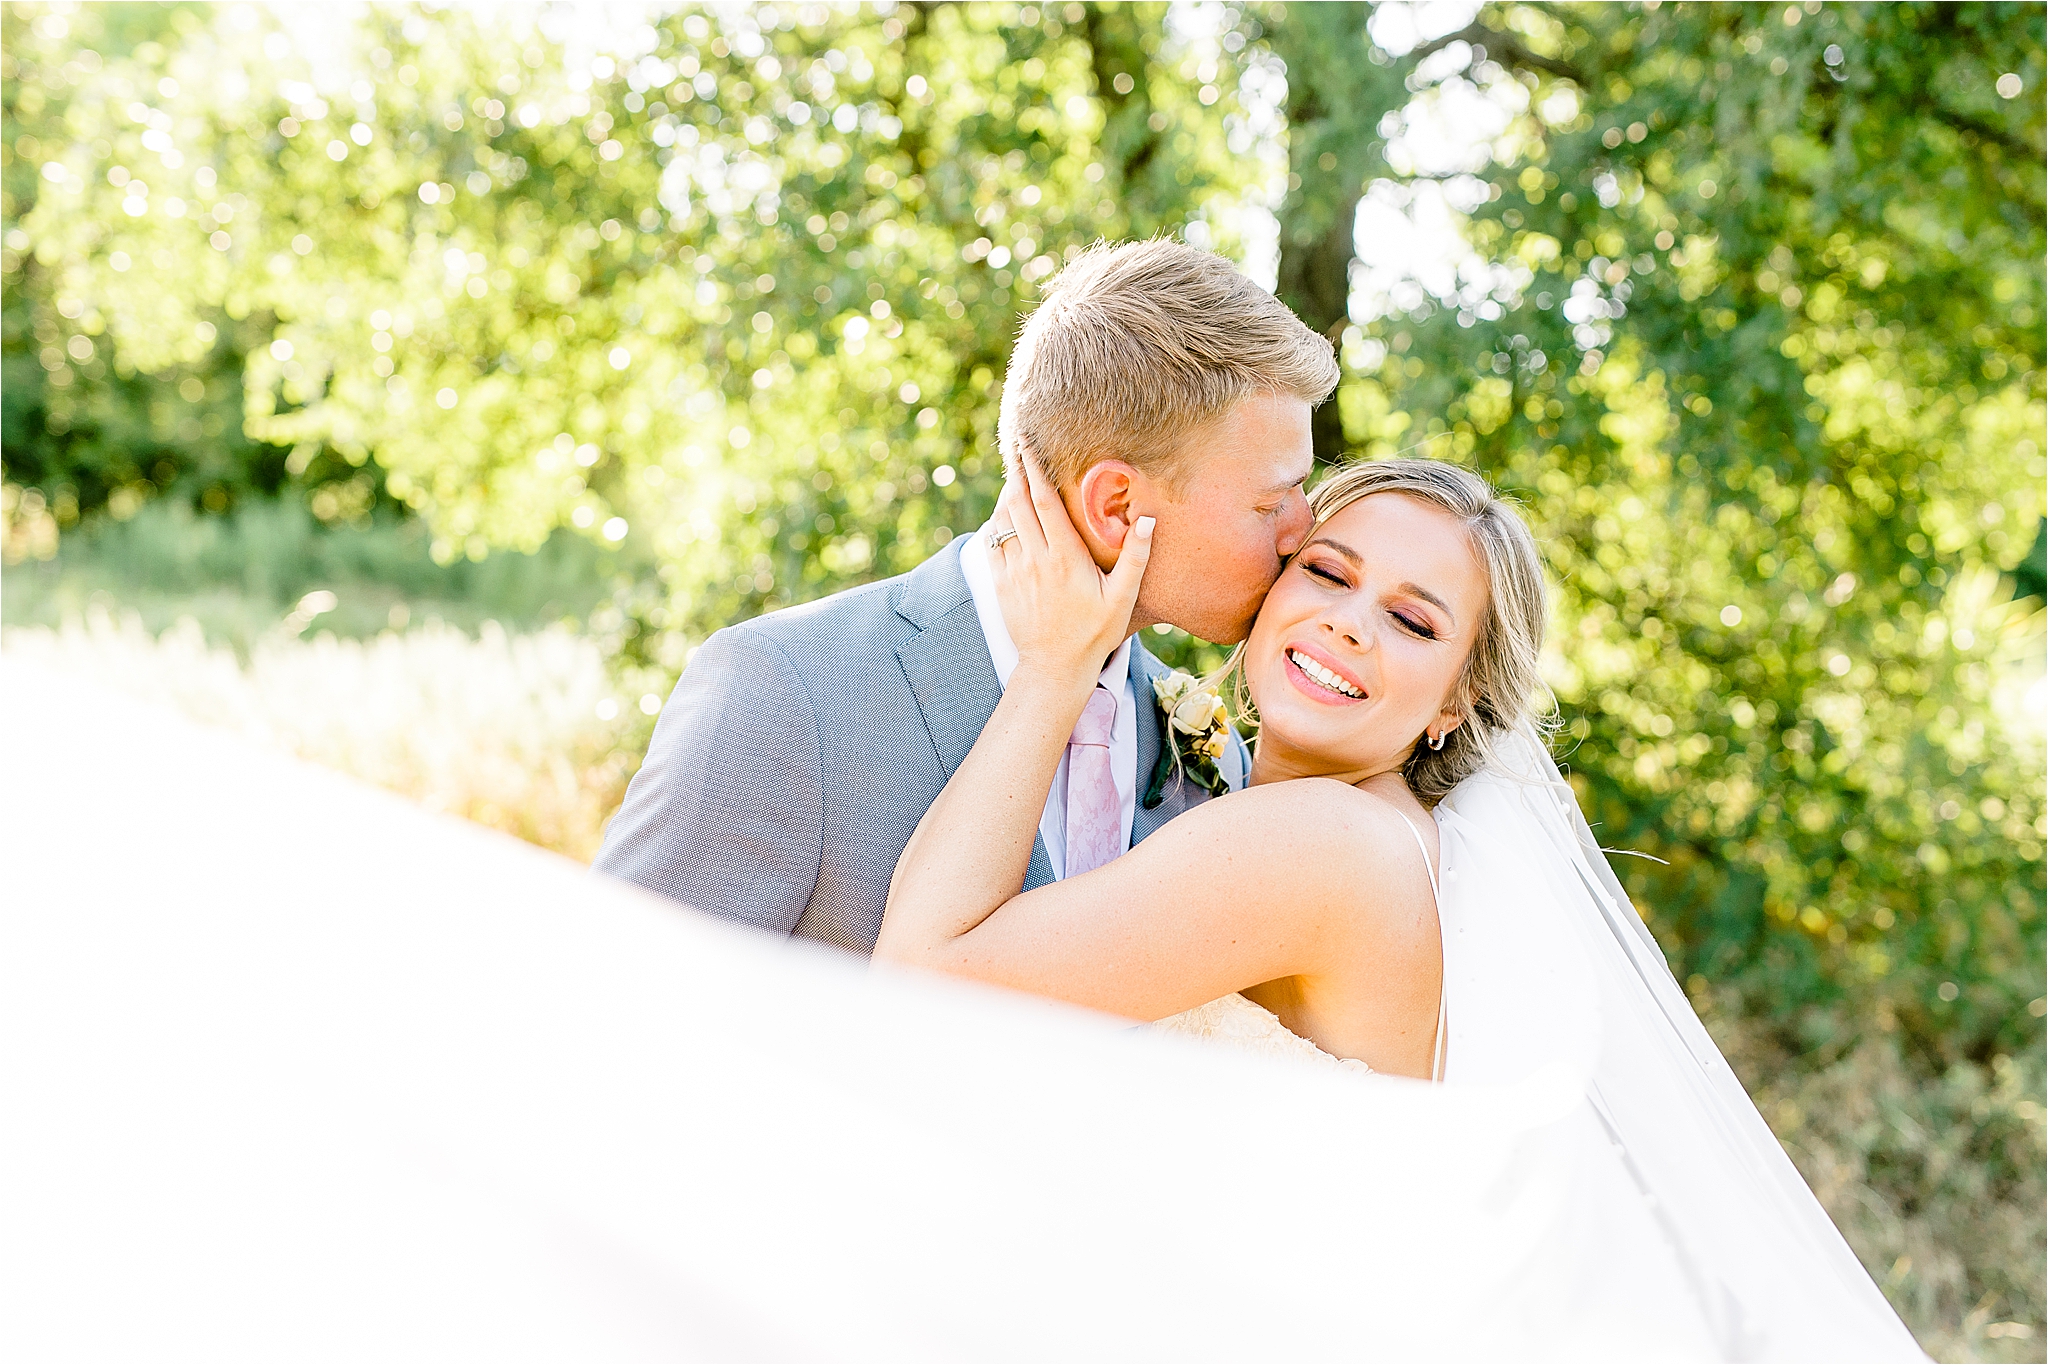 A groom kisses his new bride on the cheek as the veil swoops in front of them during wedding portraits at Arbor Hills Nature Preserve by Dallas Wedding Photographer Jillian Hogan 